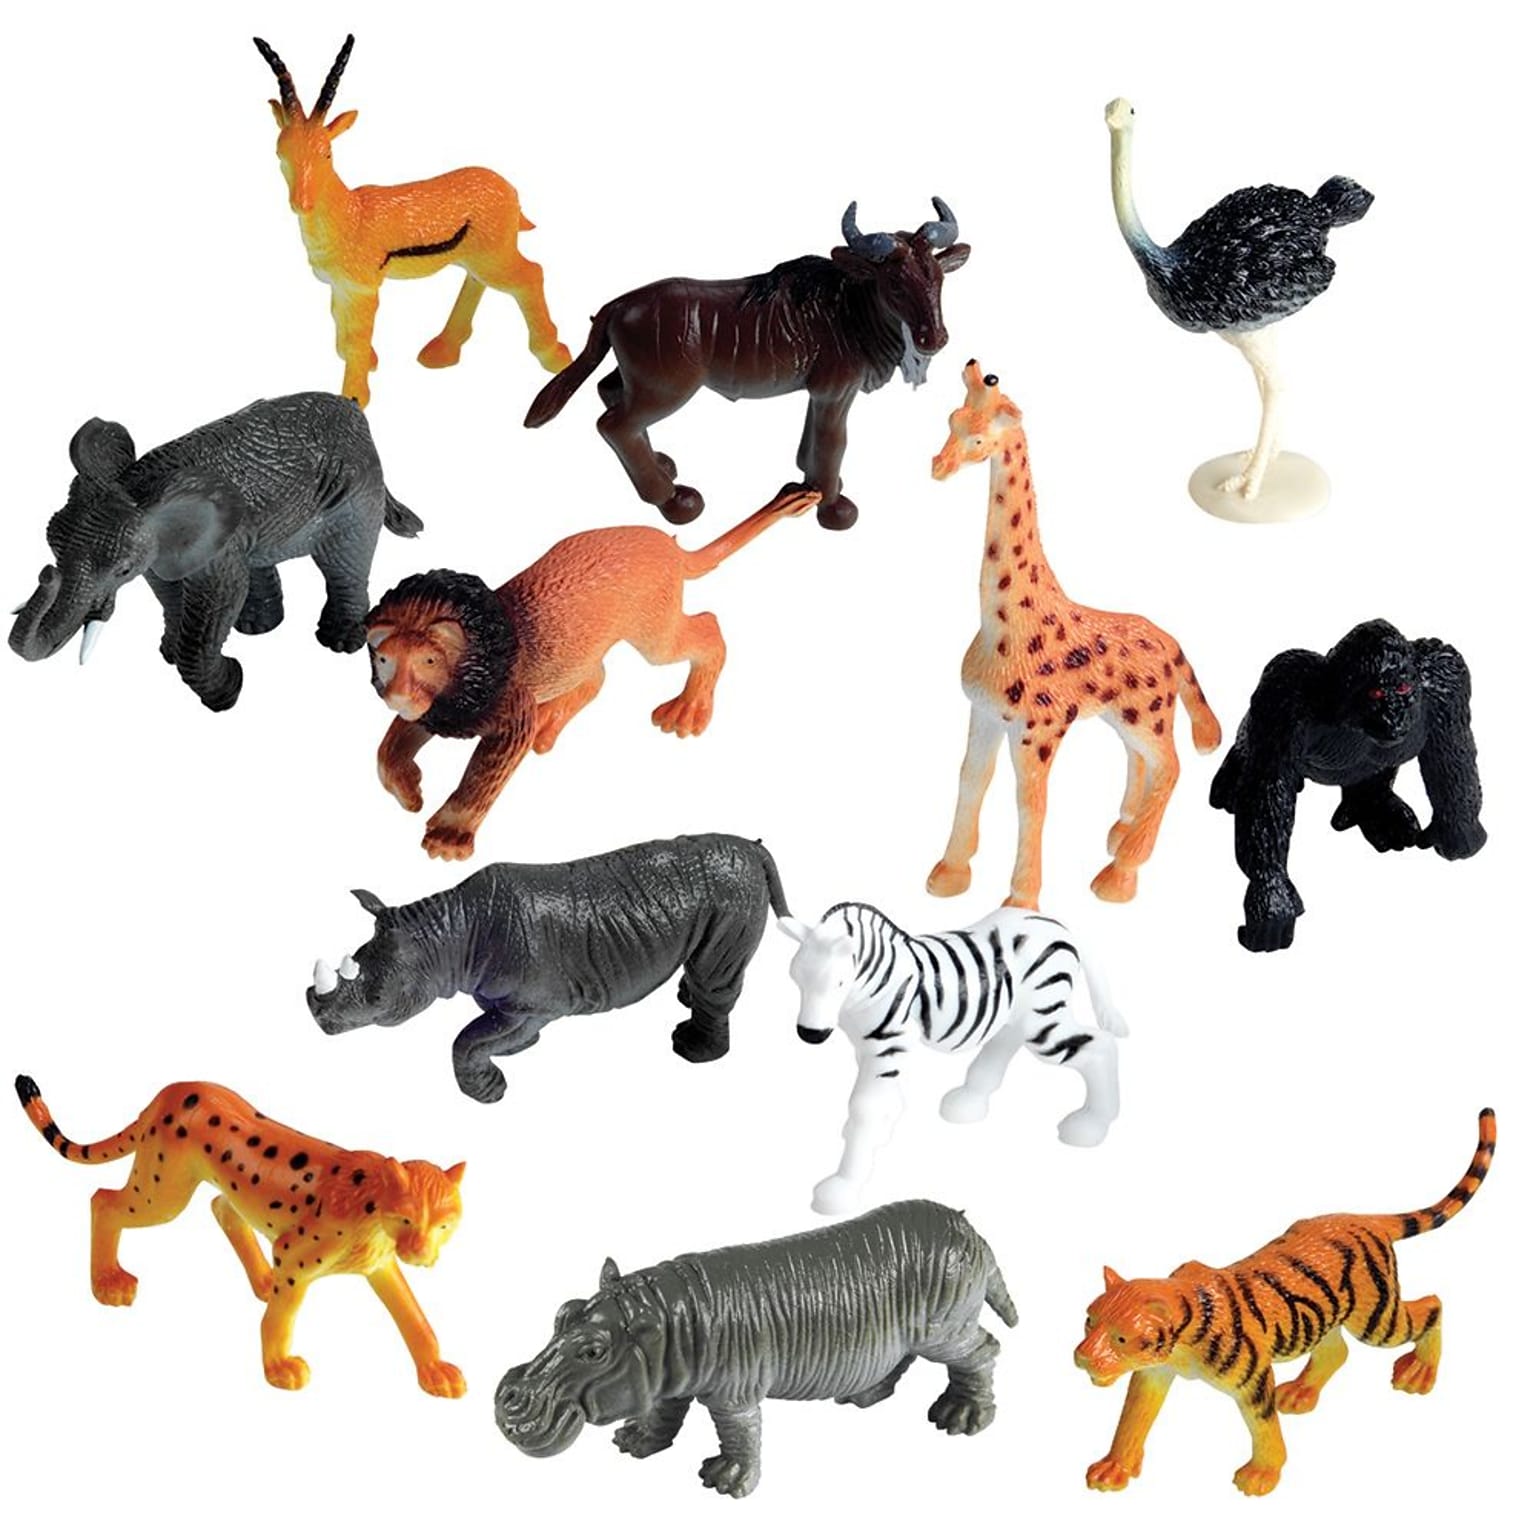 Learning Resources Jungle Animal Counters, 60/Set